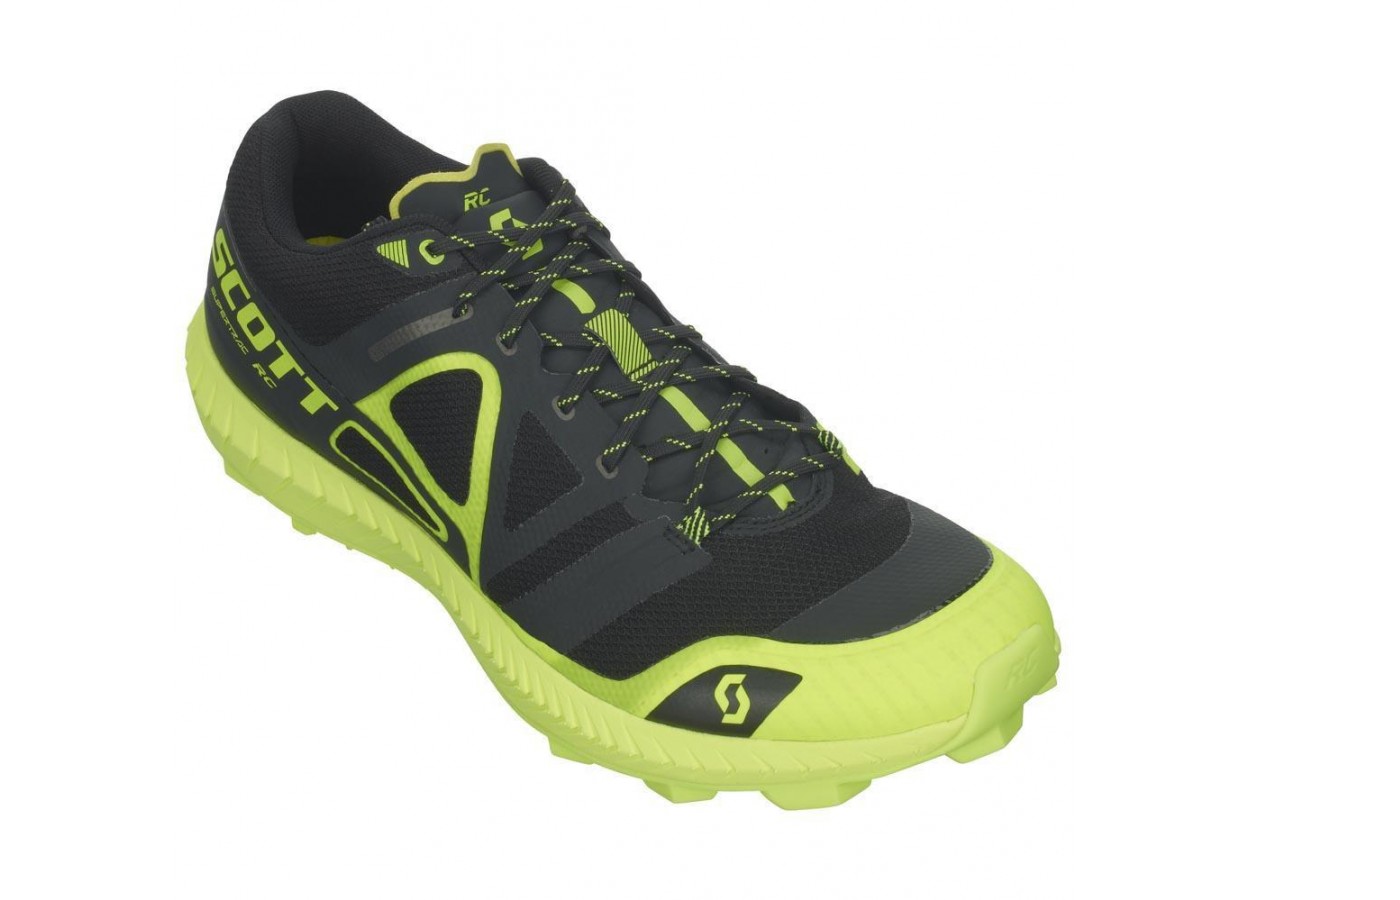 The Scott Supertrac RC offers mesh and no sew uppers for comfort and ventilation.